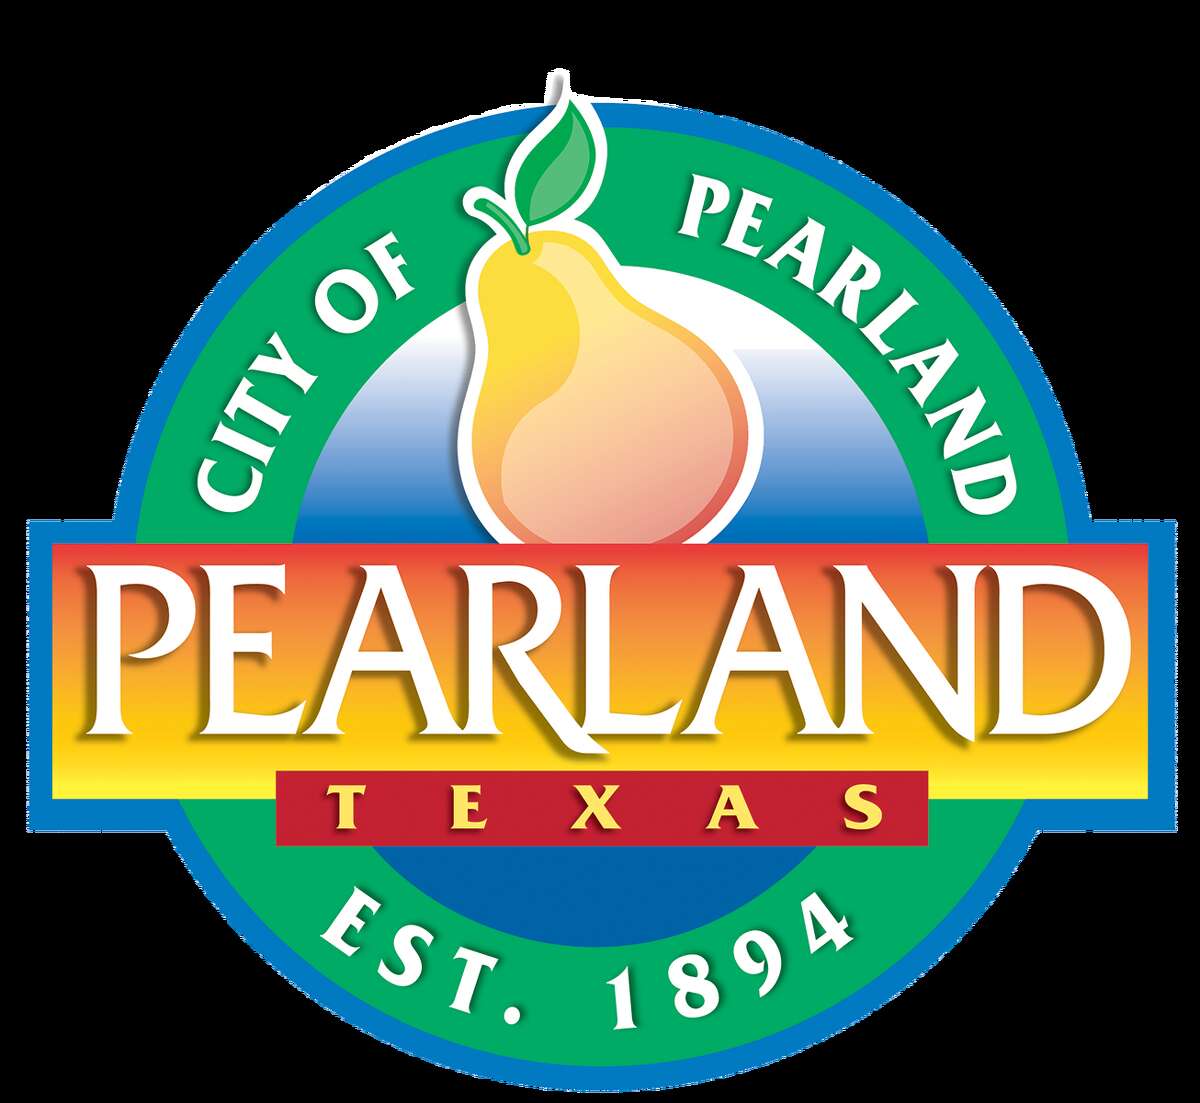 Answer: Pearland